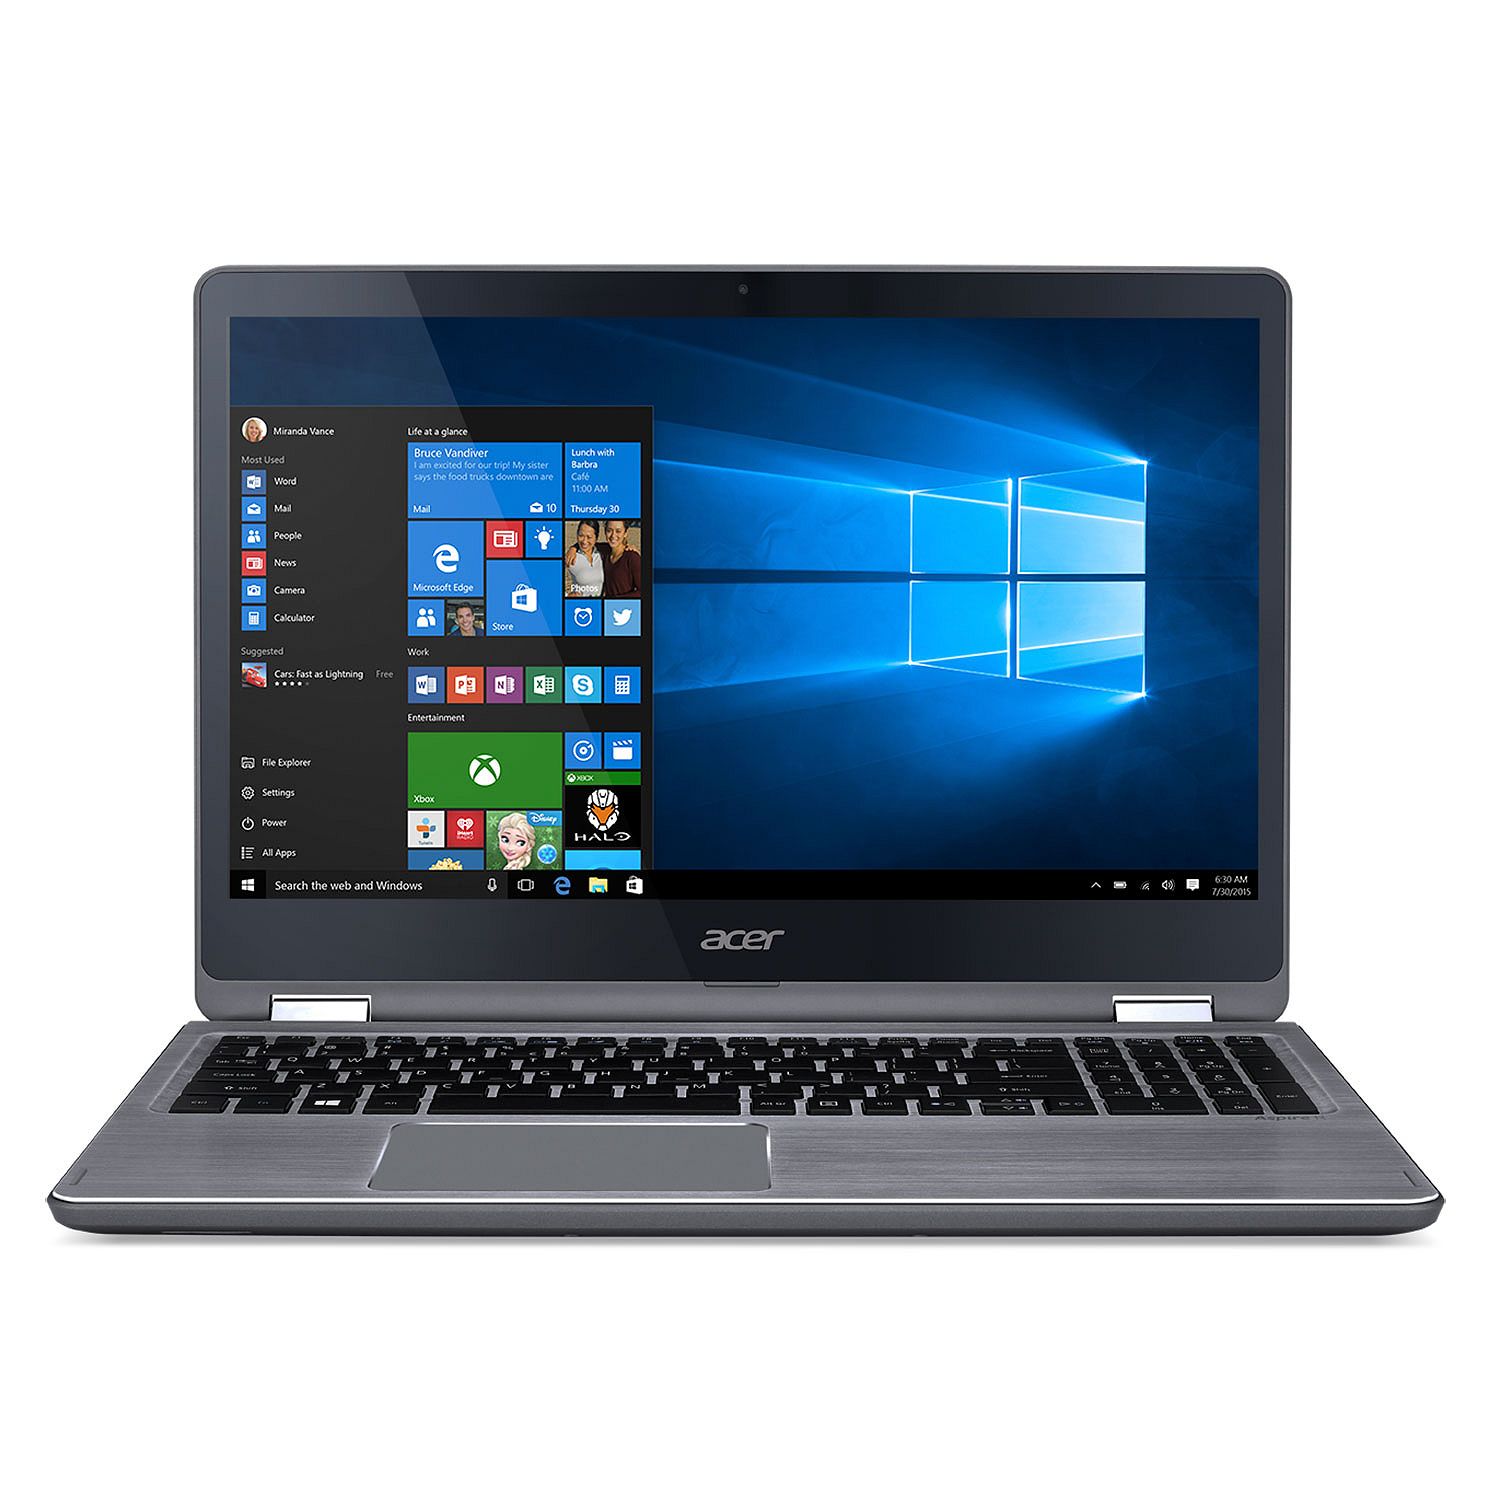 Acer SP315-51 2-in-1 Touchscreen Convertible 15.6″ Laptop, 7th Gen Core i7, 12GB RAM, 1TB HDD